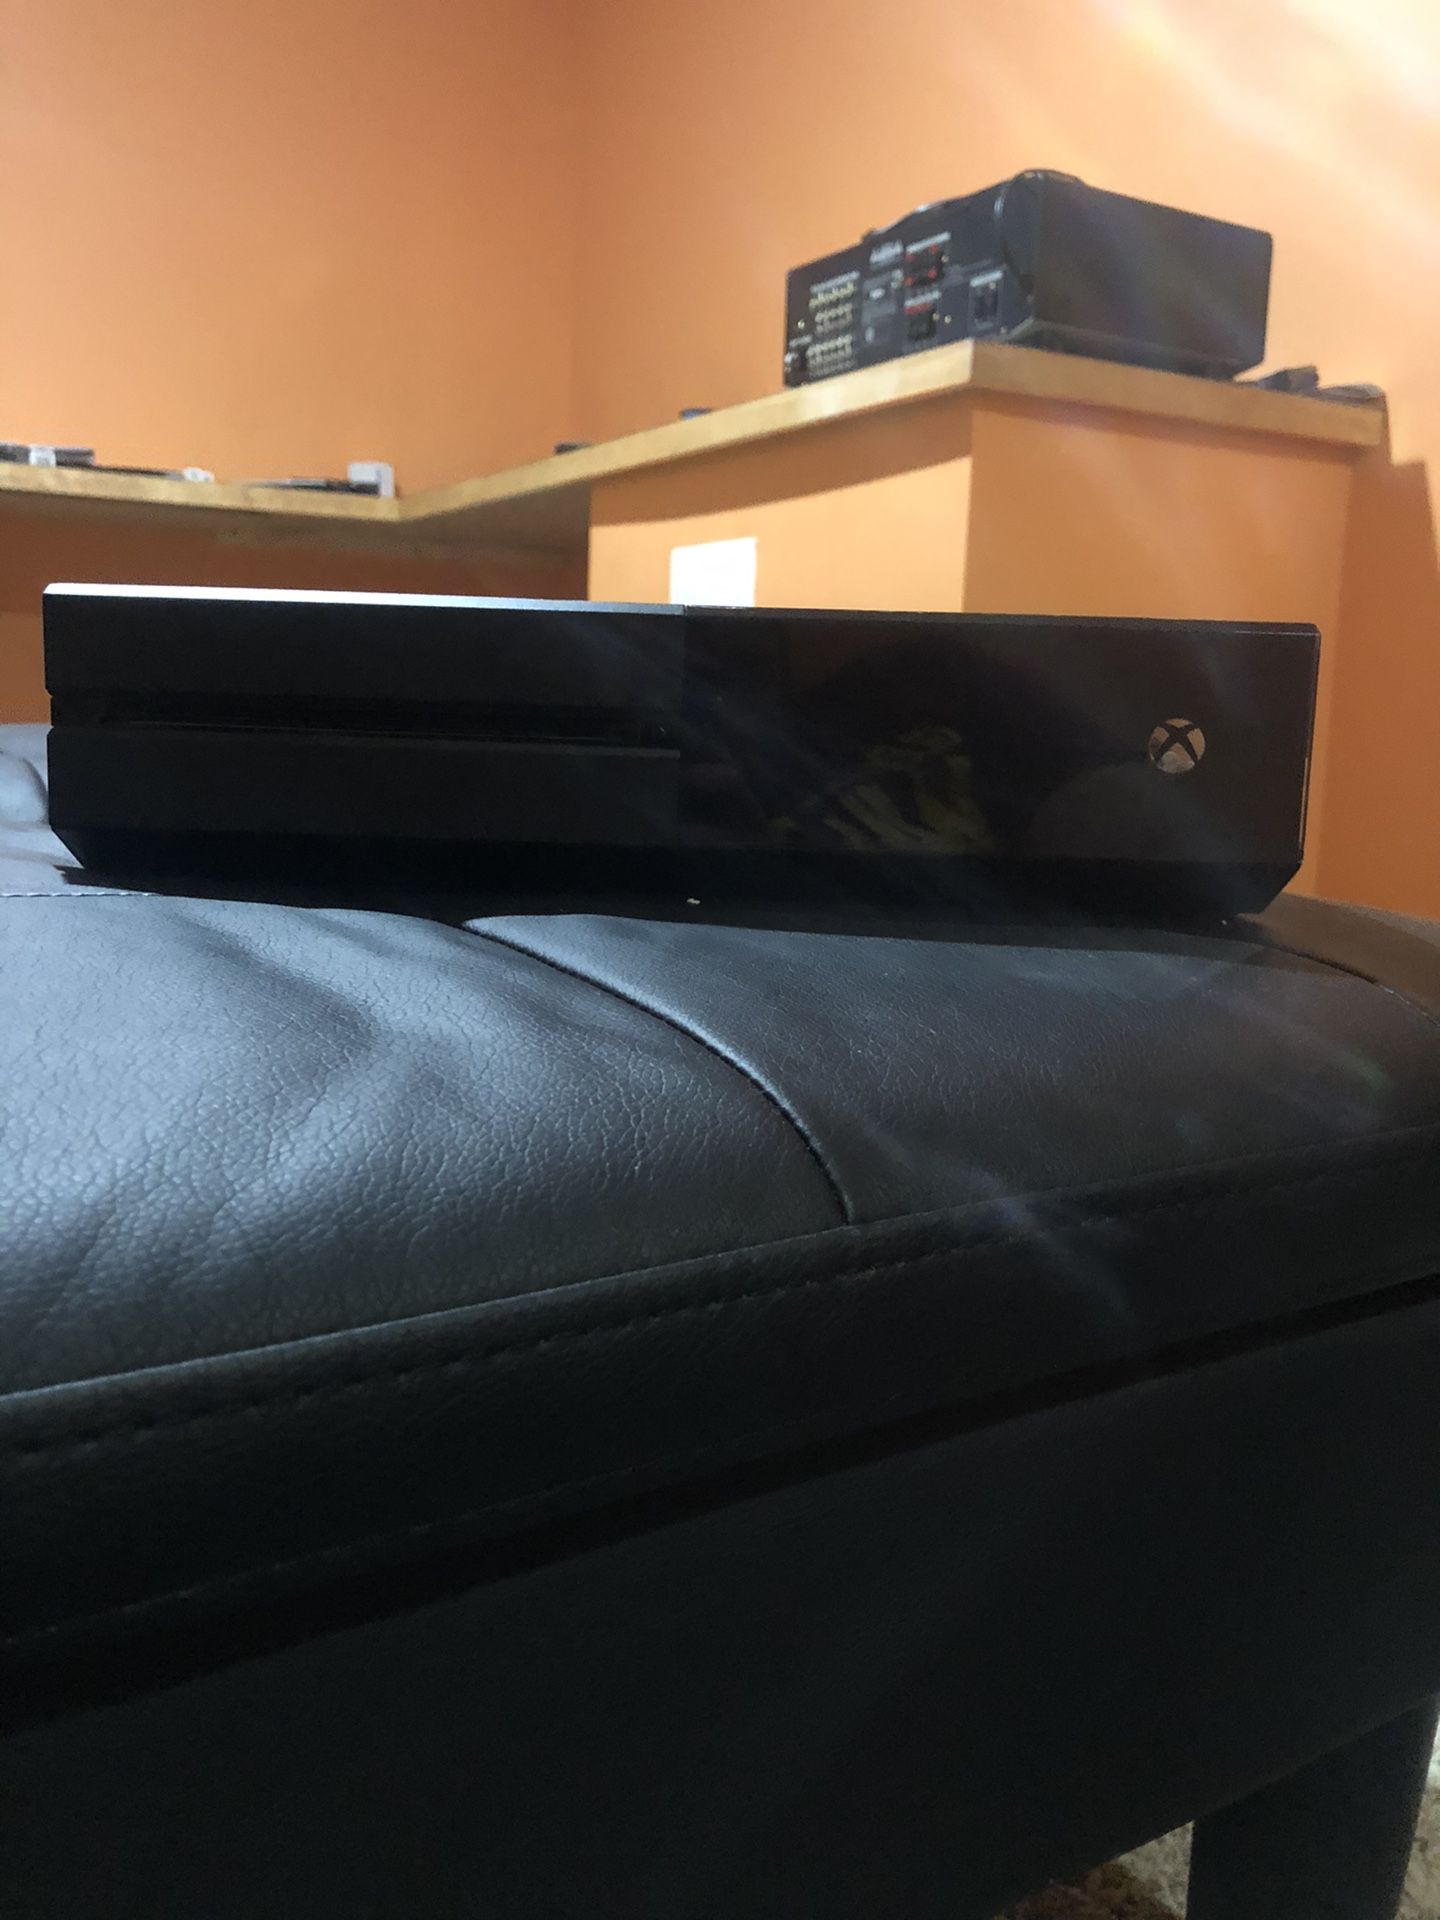 Xbox One + controller + games